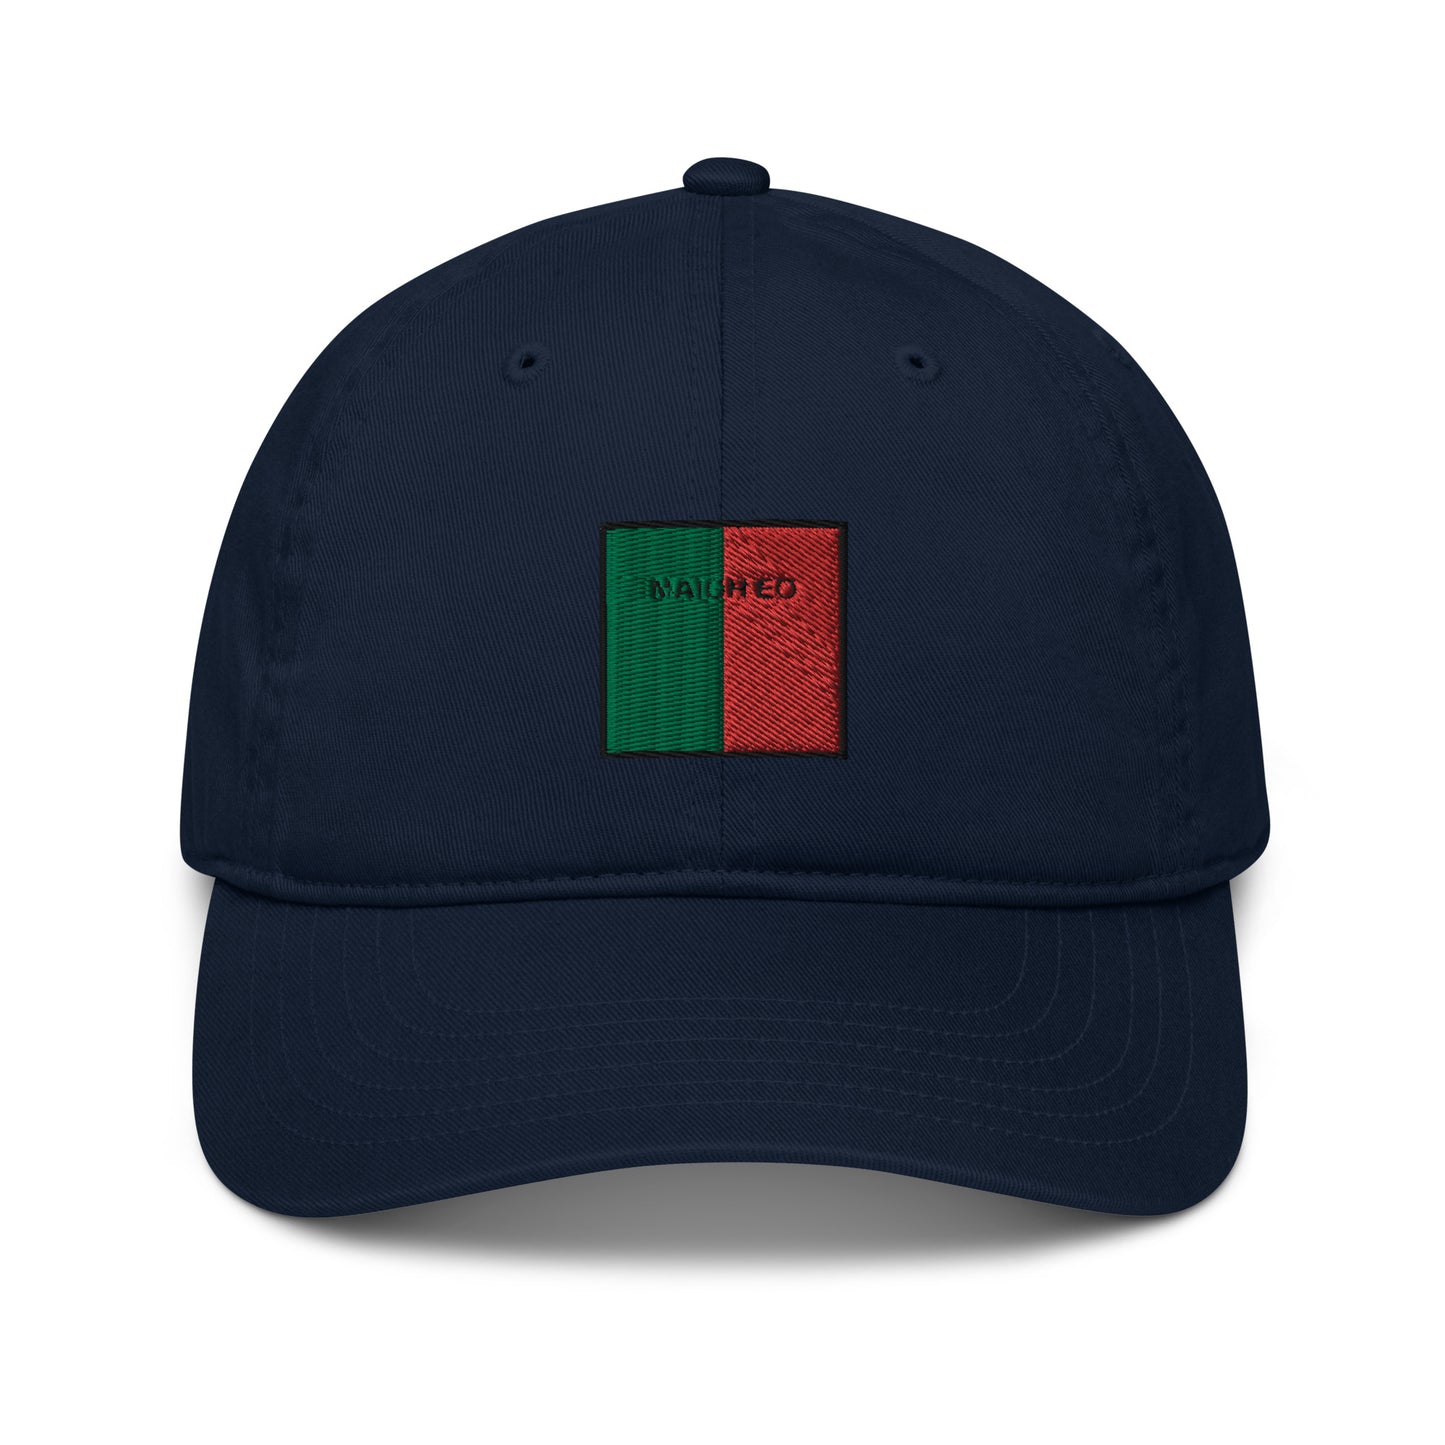 Embroidered Maigh Eo Baseball Hat - 100% organic cotton